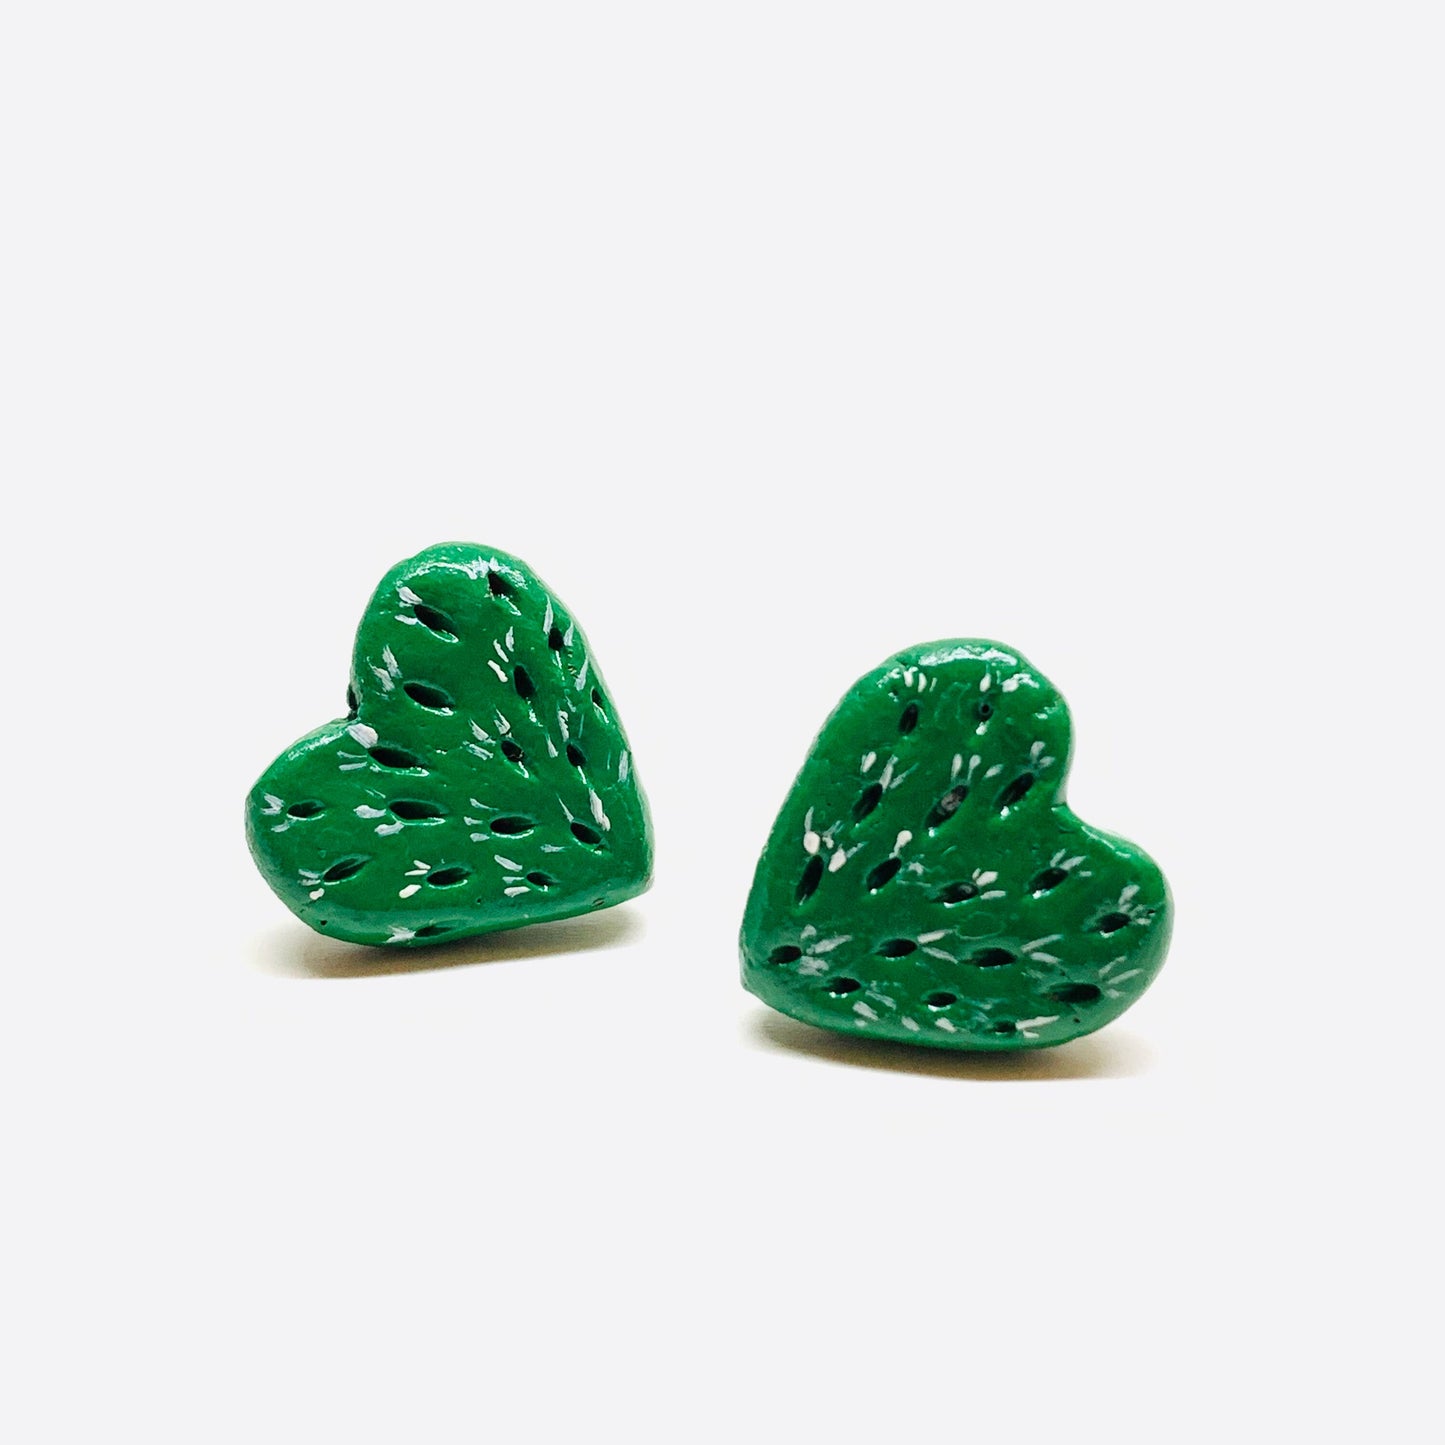 Lovely Multi-Punctured-Carved Cactus Heart Stud Earrings Clay Jewelry Mexico Folk ArtToWear Birthday Gift Idea Girls Women Claywelry Aretes